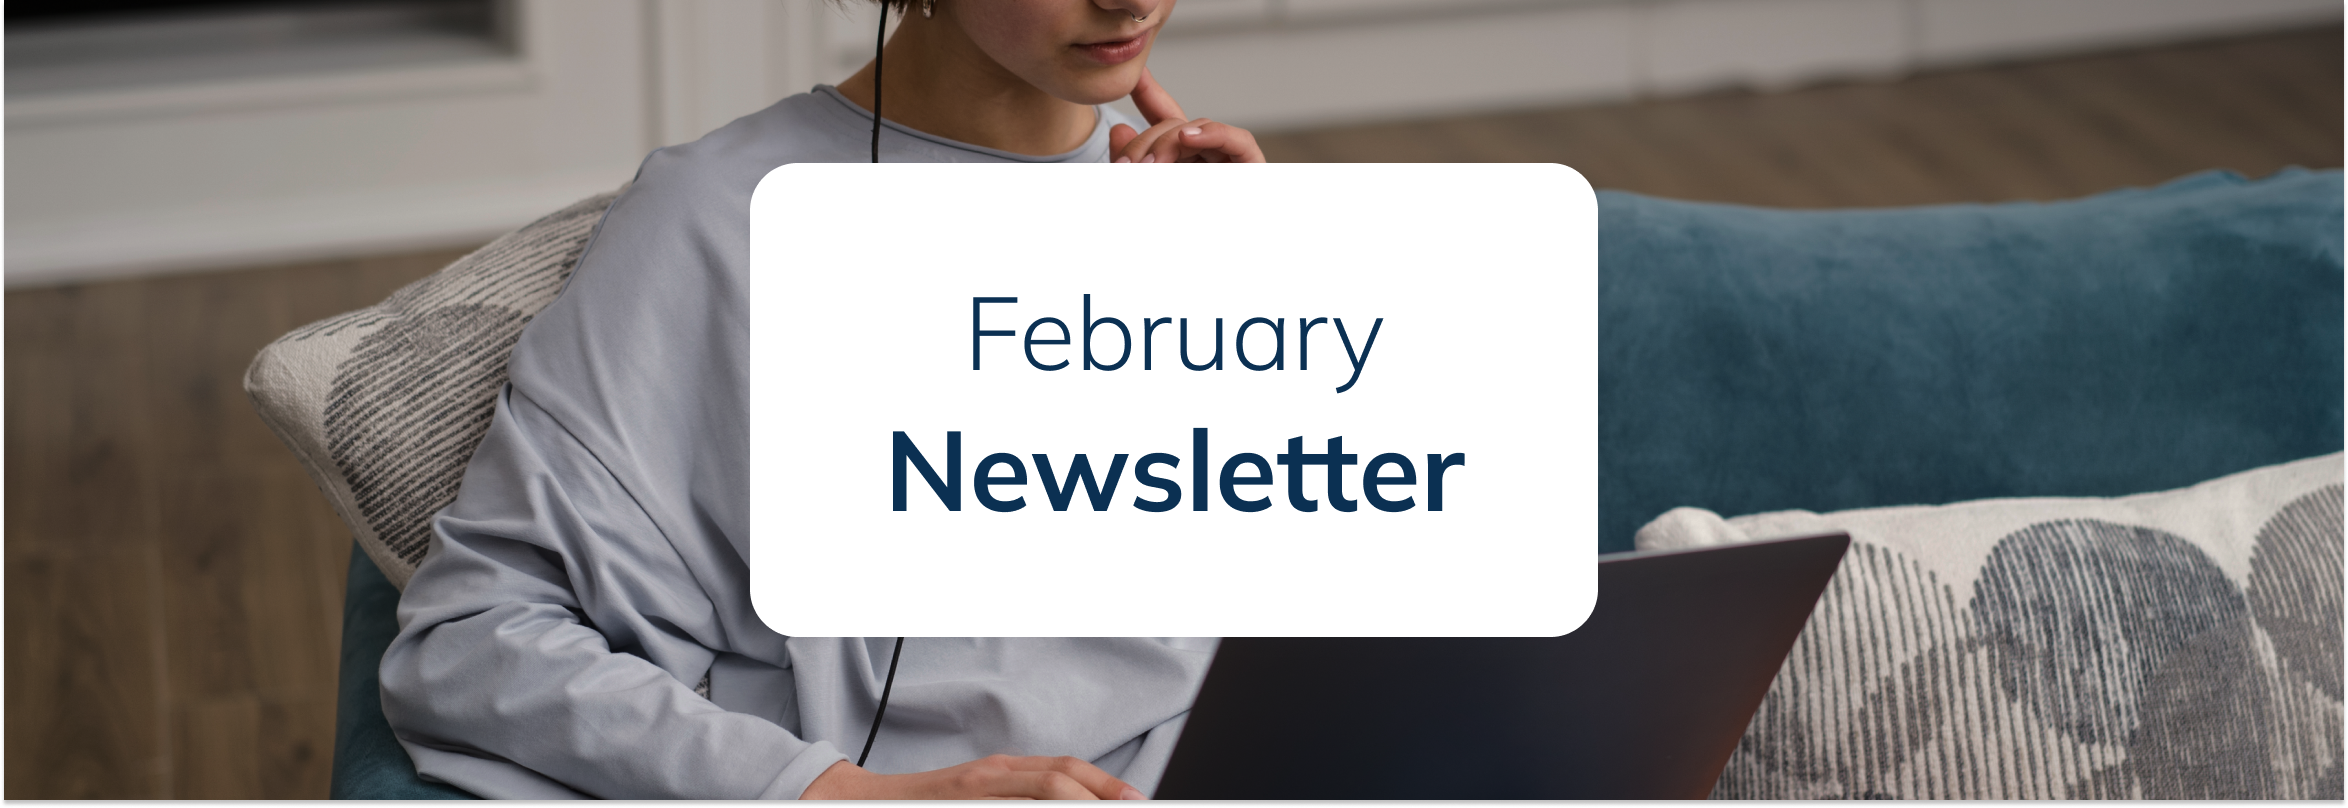 February Newsletter - New Year, New Objectives"